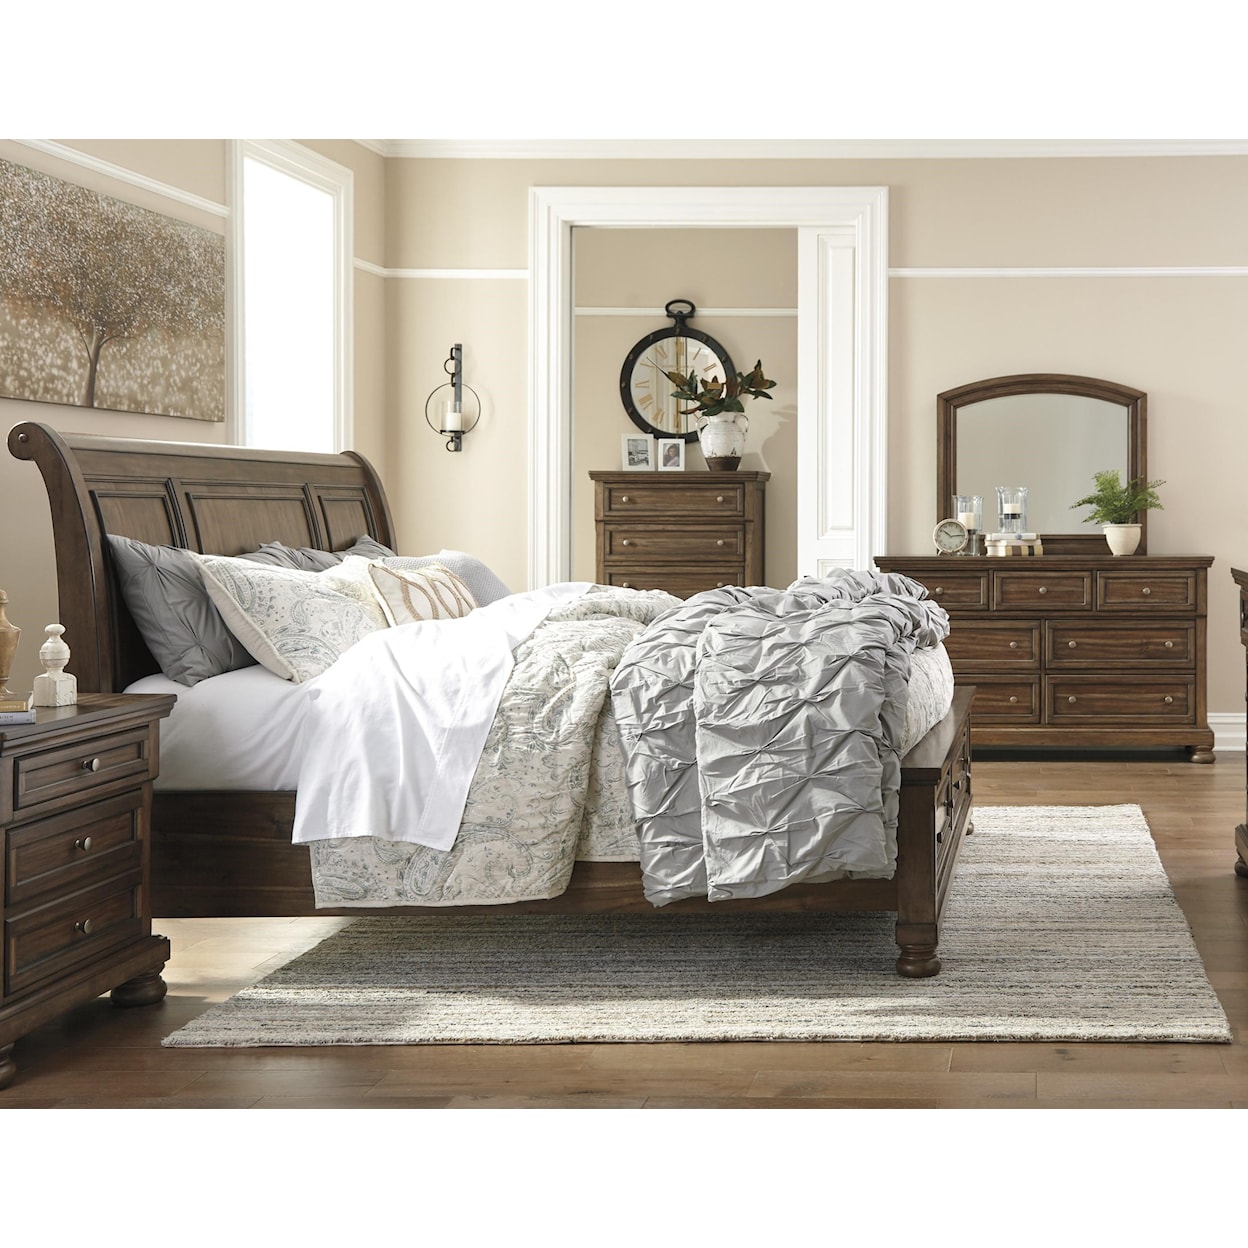 Signature Design by Ashley Flynnter Queen 5 Piece Bedroom Group